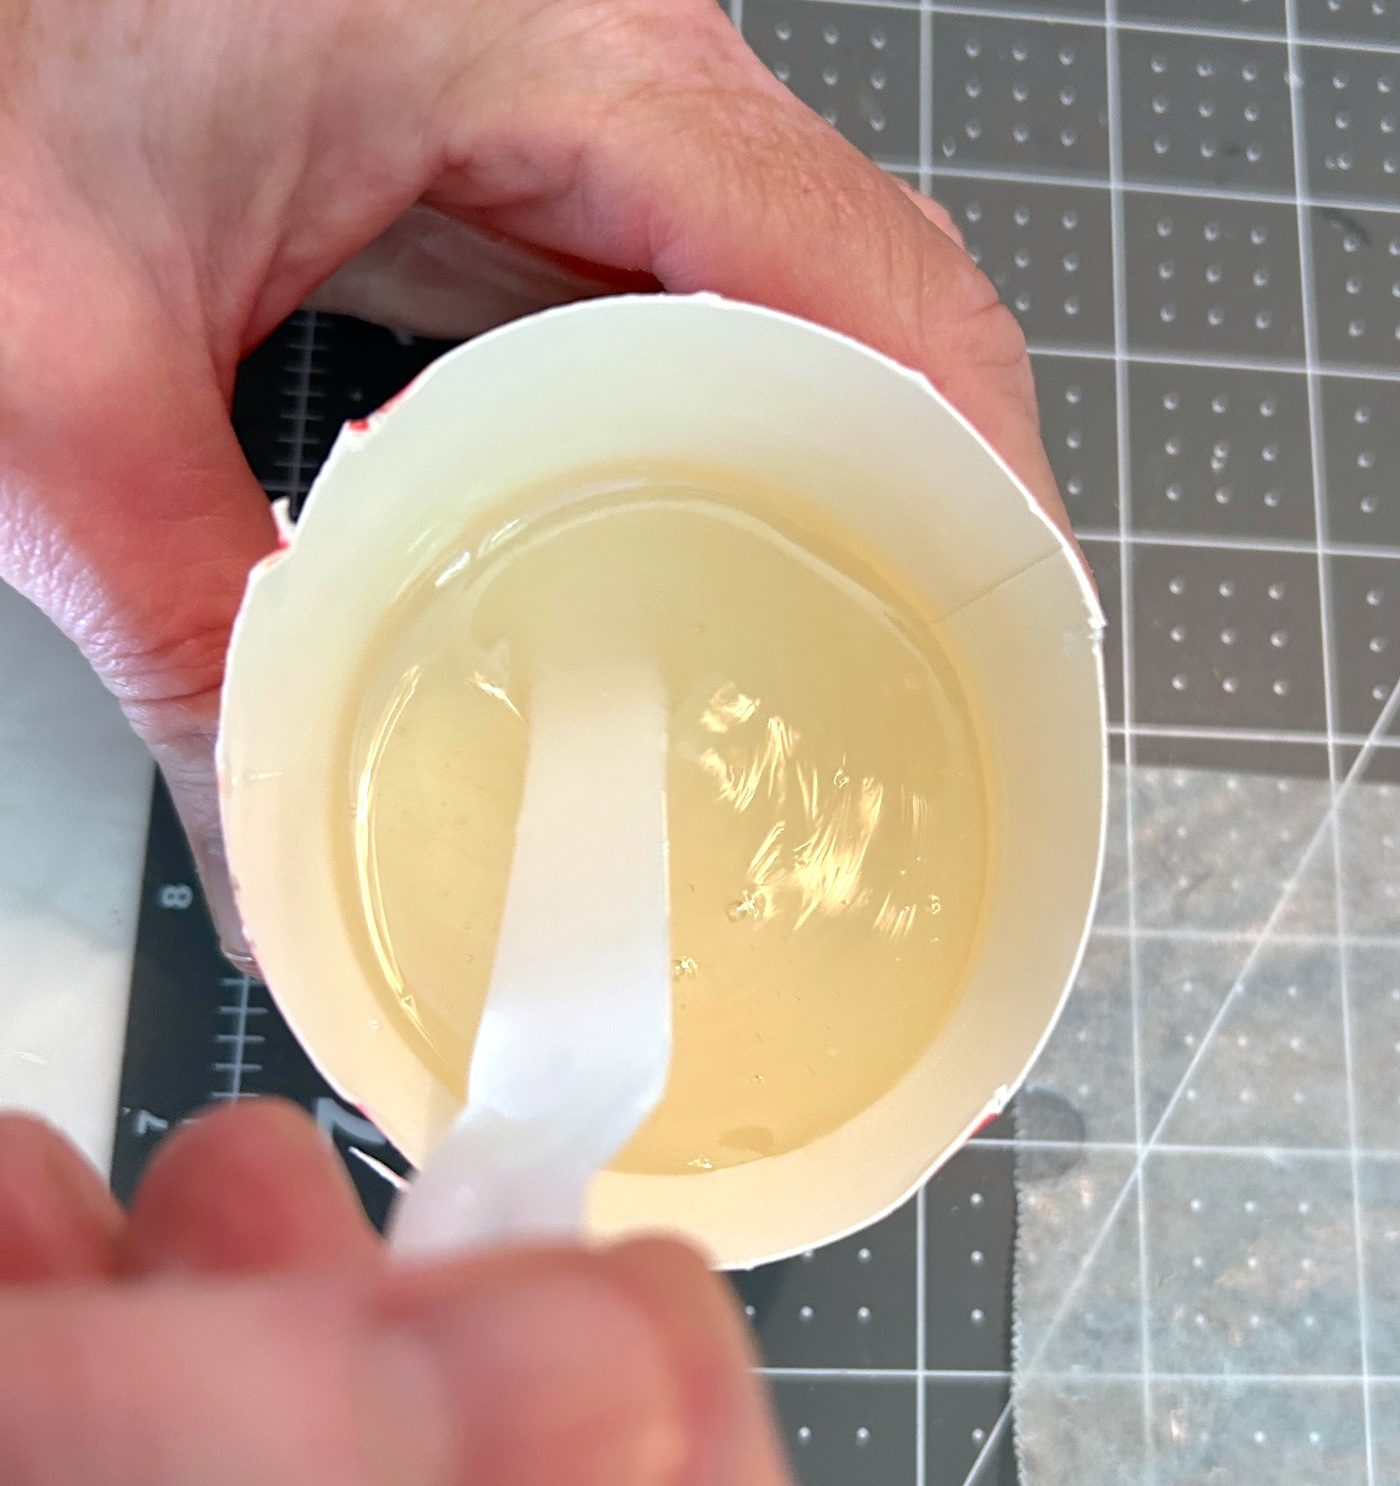 Mixing resin in a small paper cup